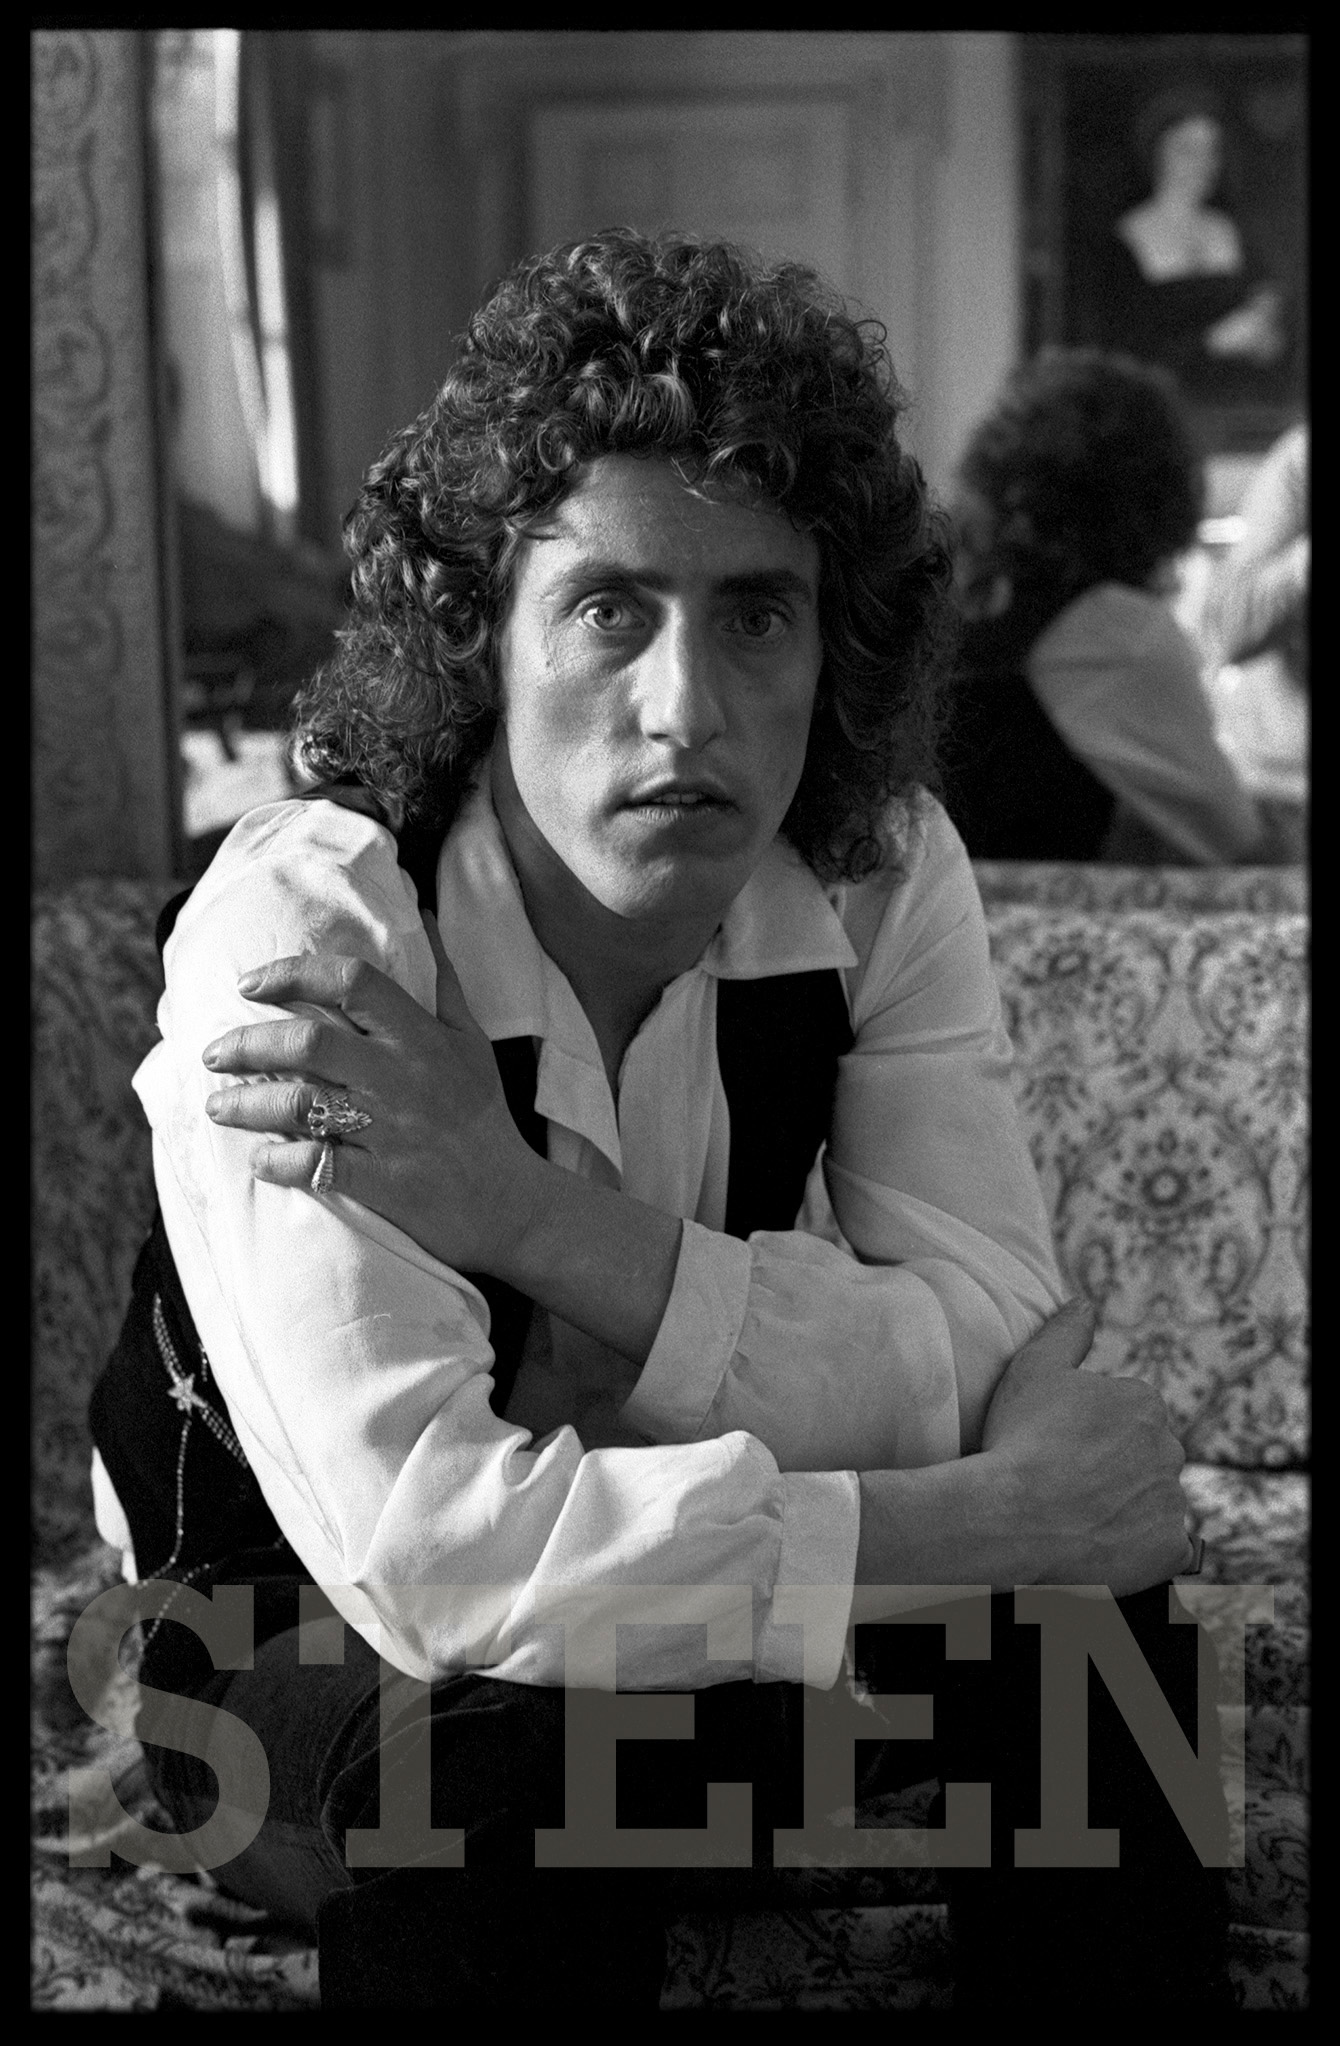 exclusive portrait of roger daltery of the rock band the who by british photographer david steen